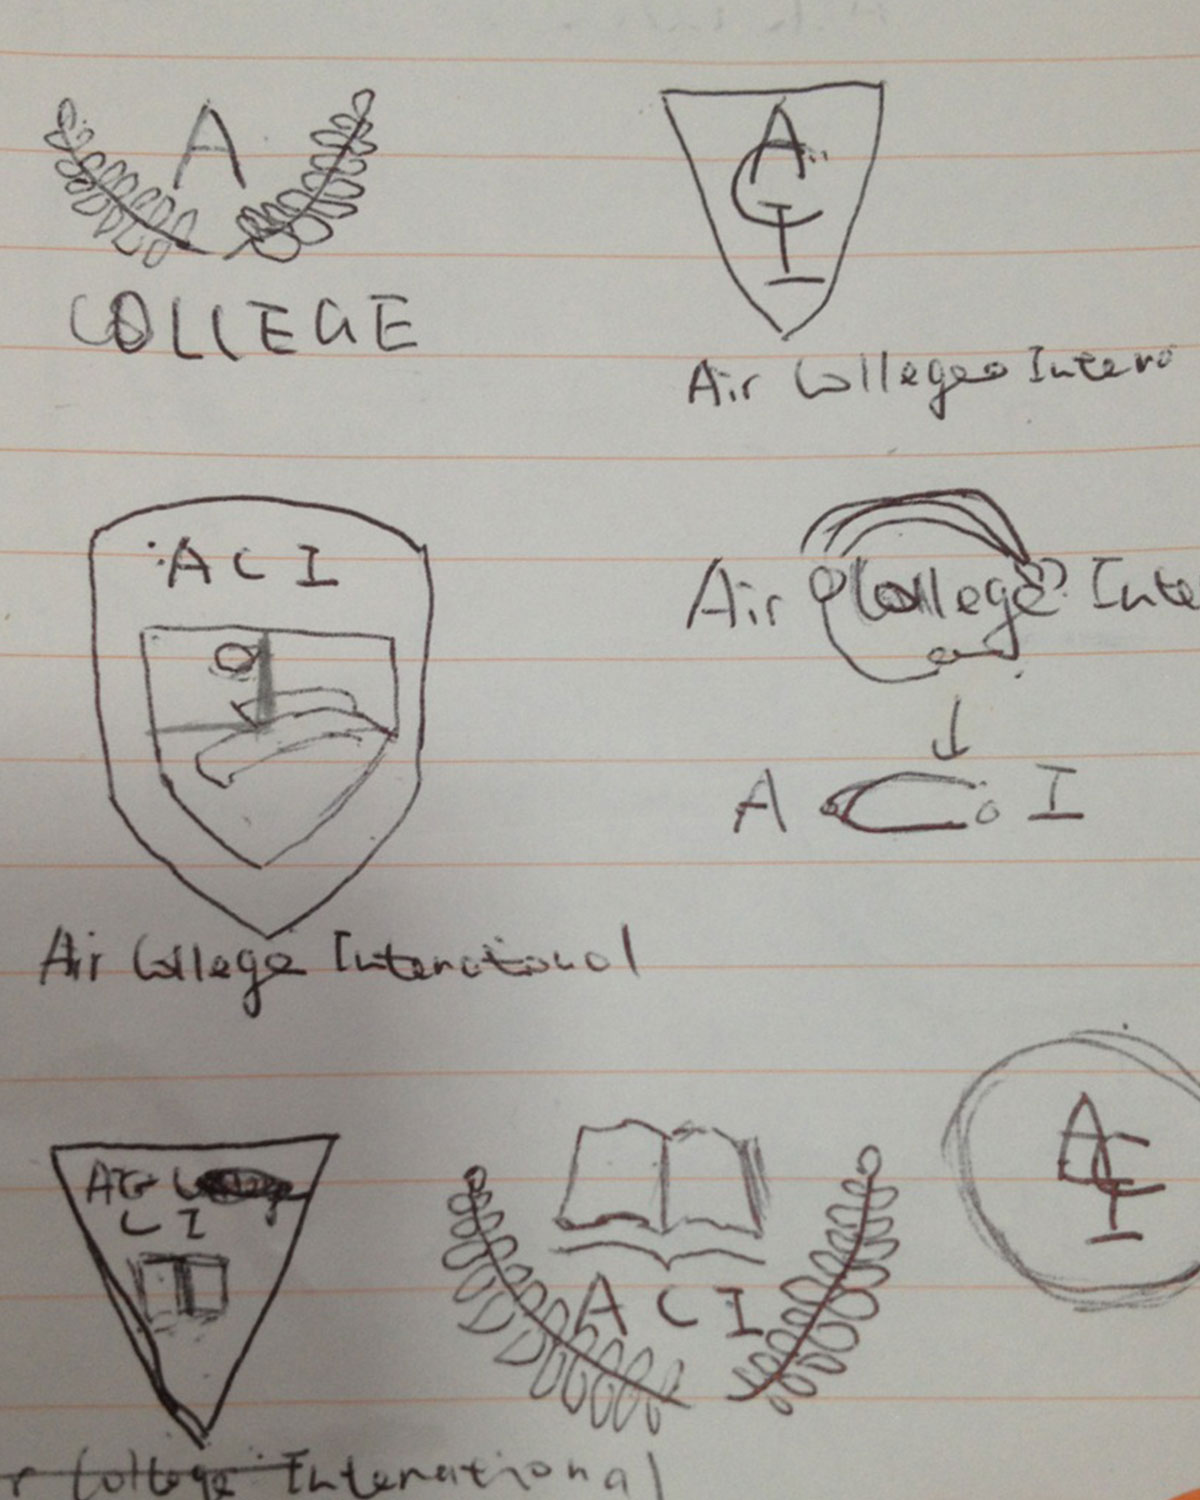 Air College International - Stakeholder's initial rough sketches 2